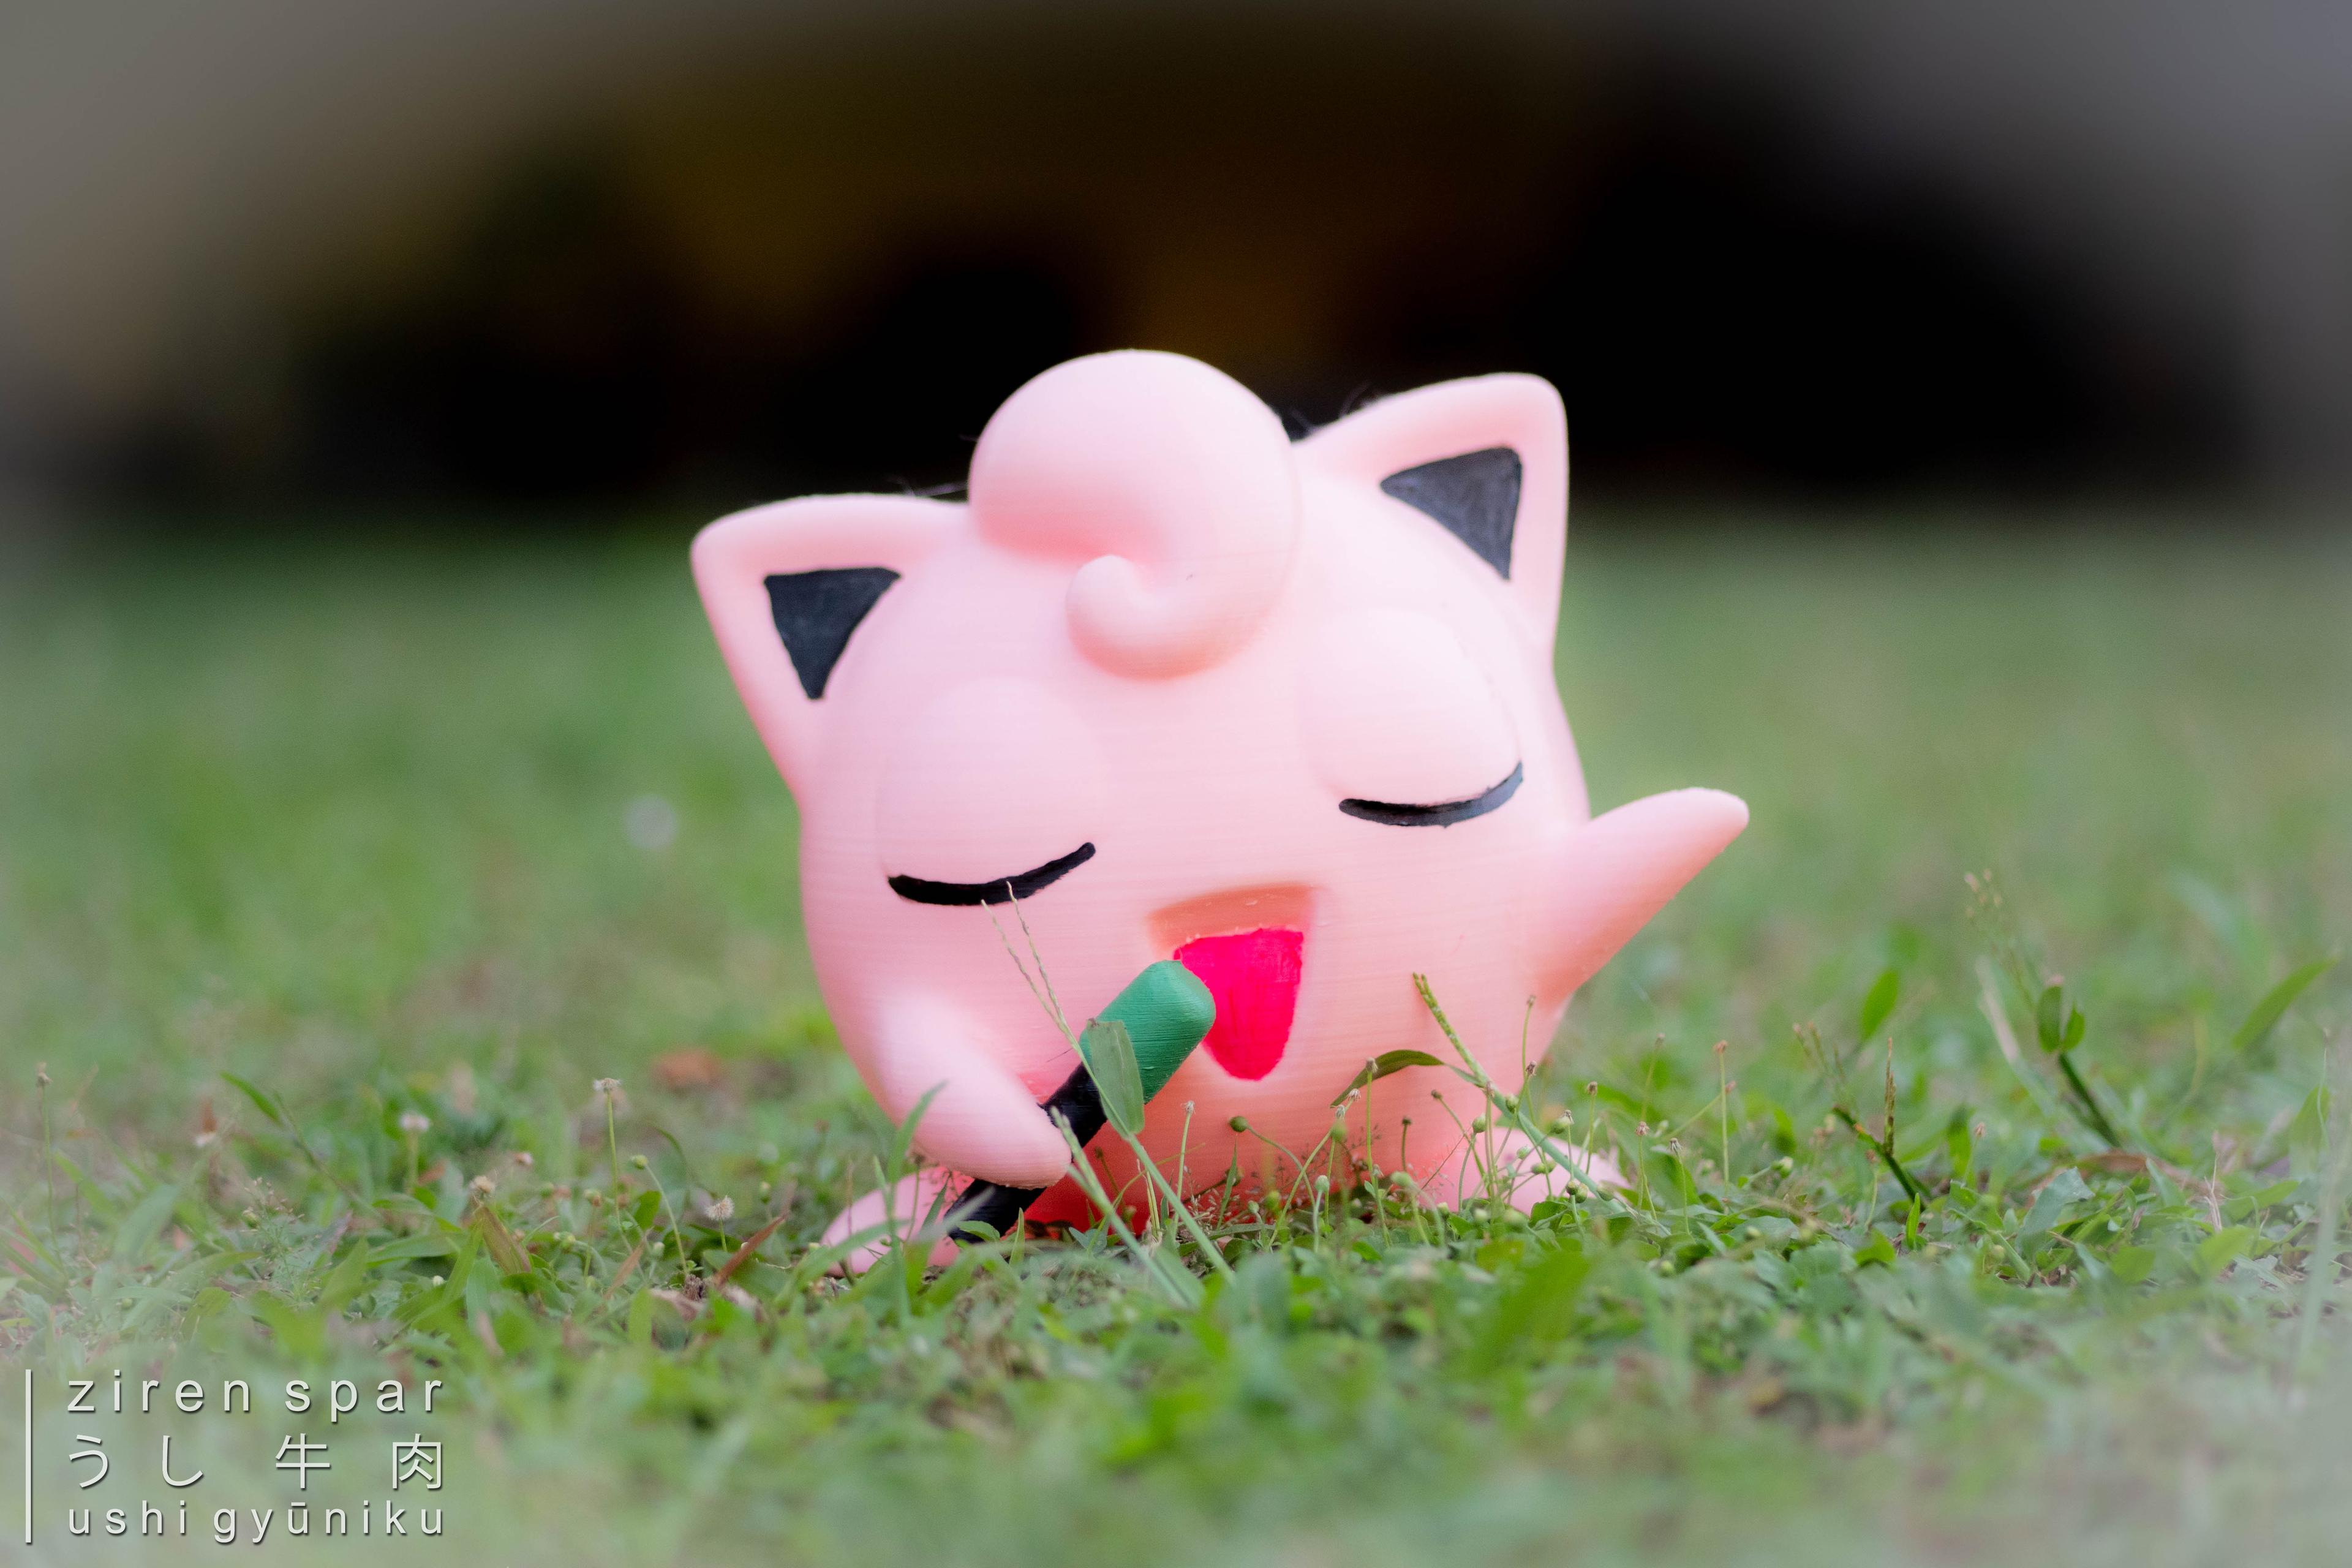 Jigglypuff(Pokémon) - wouldn't mind hearing jigglypuff's singing then waking up only once covid is over 🥱😴🥱😴
📸 gears: niichan 
🧩 assist: touchan & kāchan 
🧵 unbranded: cheapest found on shopee
🖨️ creality ender 3 pro w/ capricorn tube

#filamentfebruary - 3d model